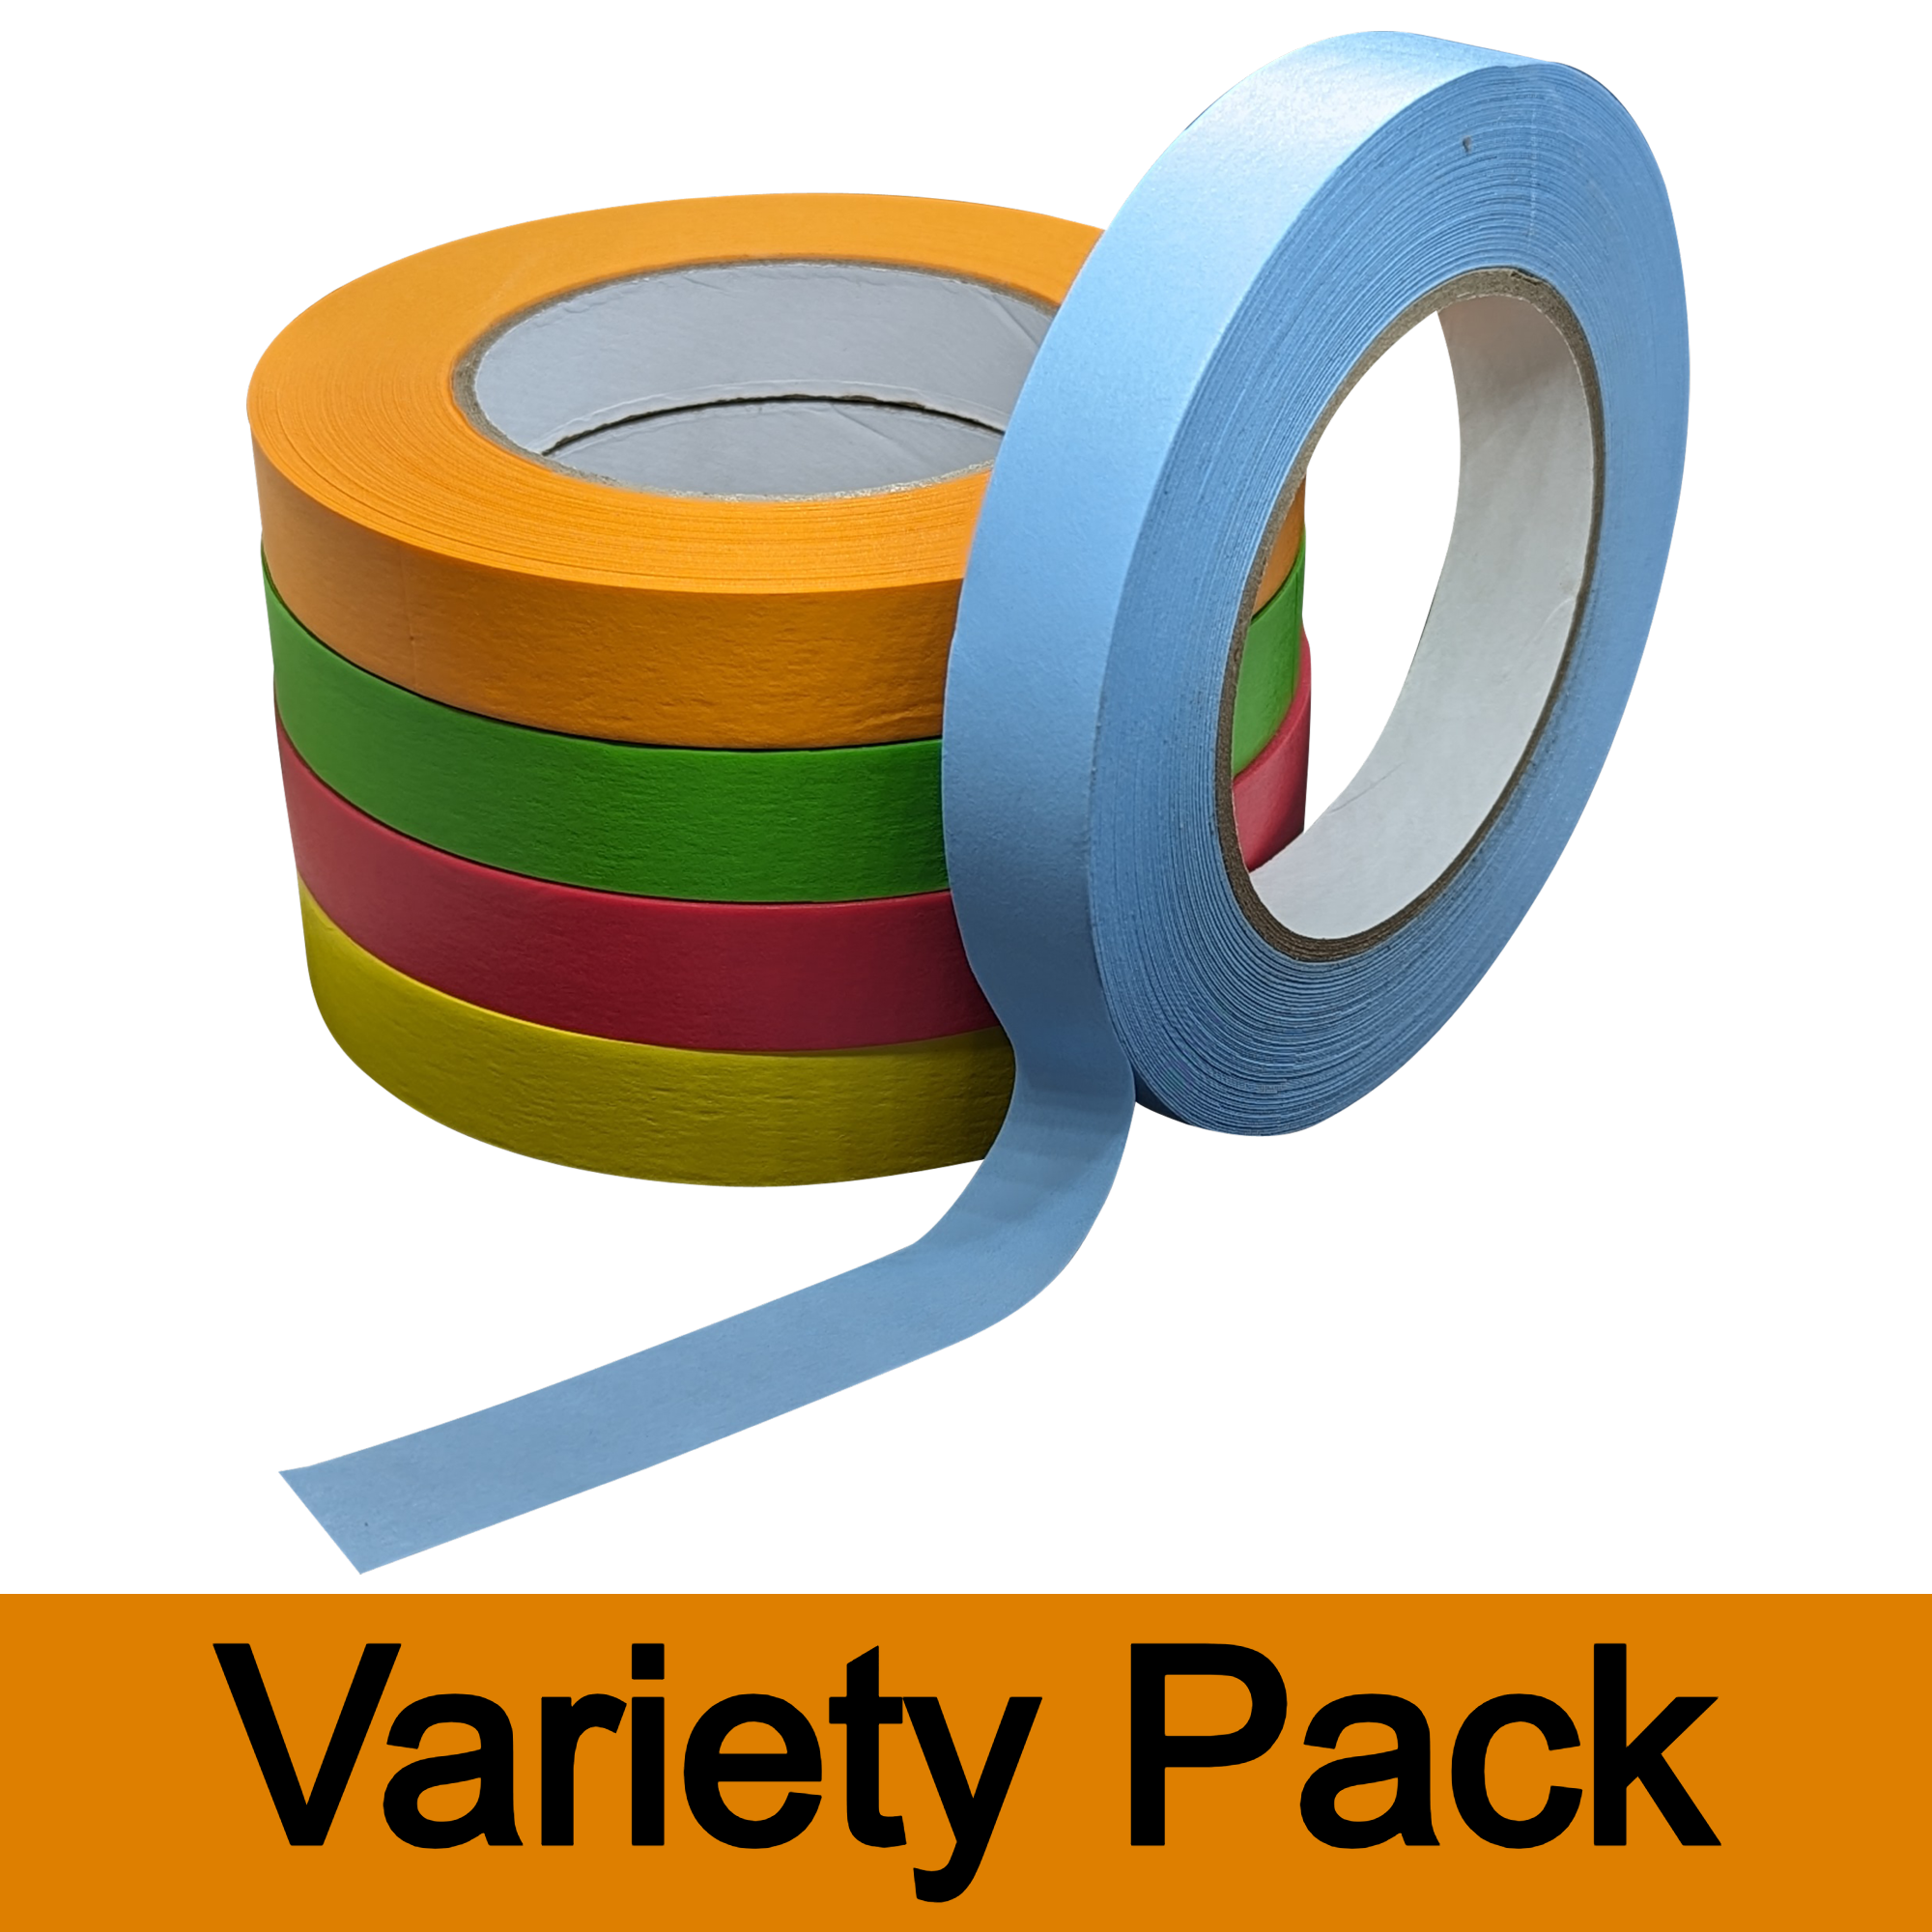 Lab Labeling Tape Variety Pack, 500 Inches Long x 1/2 inch Width, 1 inch Diameter Core [5 Rolls of Assorted Colors] for Color Coding and Marking